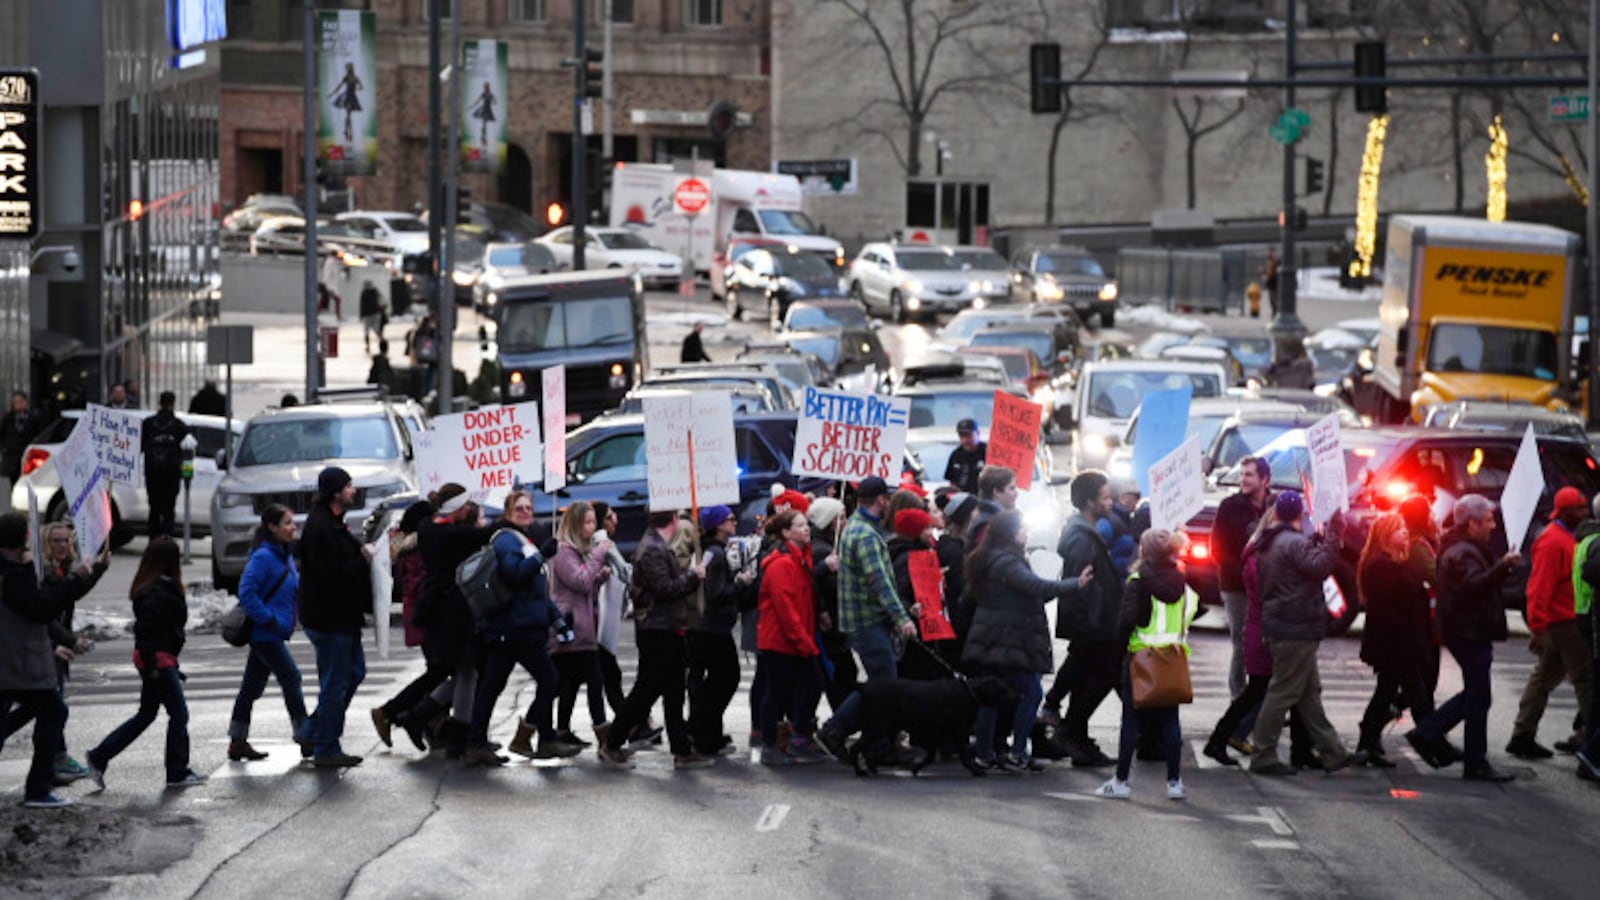 Denver Classroom Teachers Association teachers and supporters rally on January 30, 2019, demanding better wages and urging the state not to get involved in a possible strike.